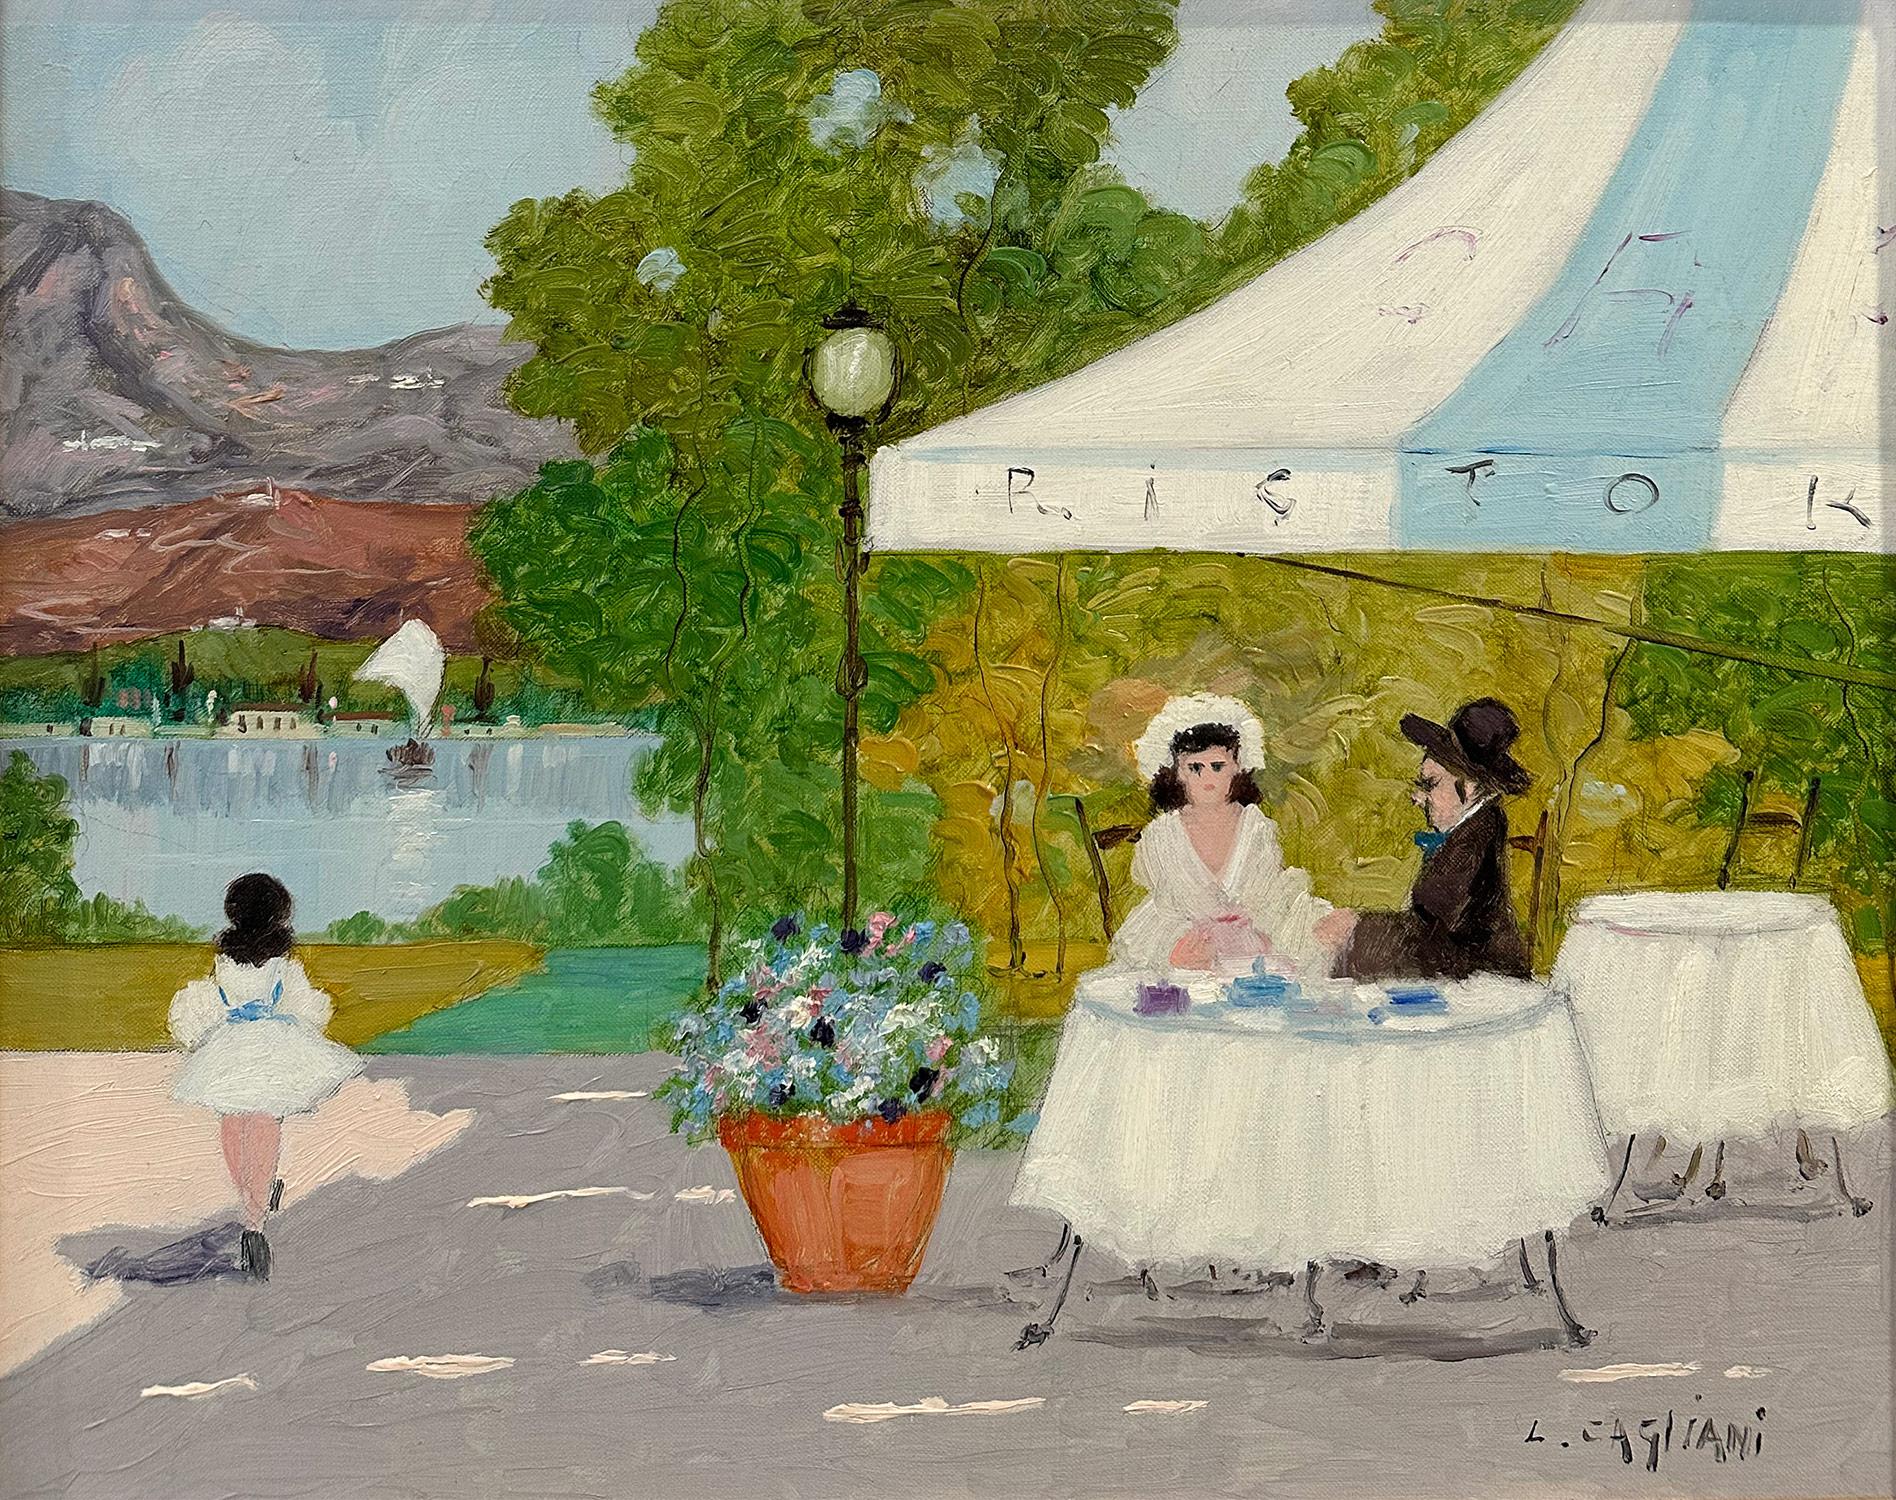 A whimsical oil painting depicting a cafe scene with Lakeside views of Lake Lugano. A region in between Switzerland and Norther Italy.  As an Italian Impressionist artist, most of Cagliani's works were produced in the first half of the 20th Century.